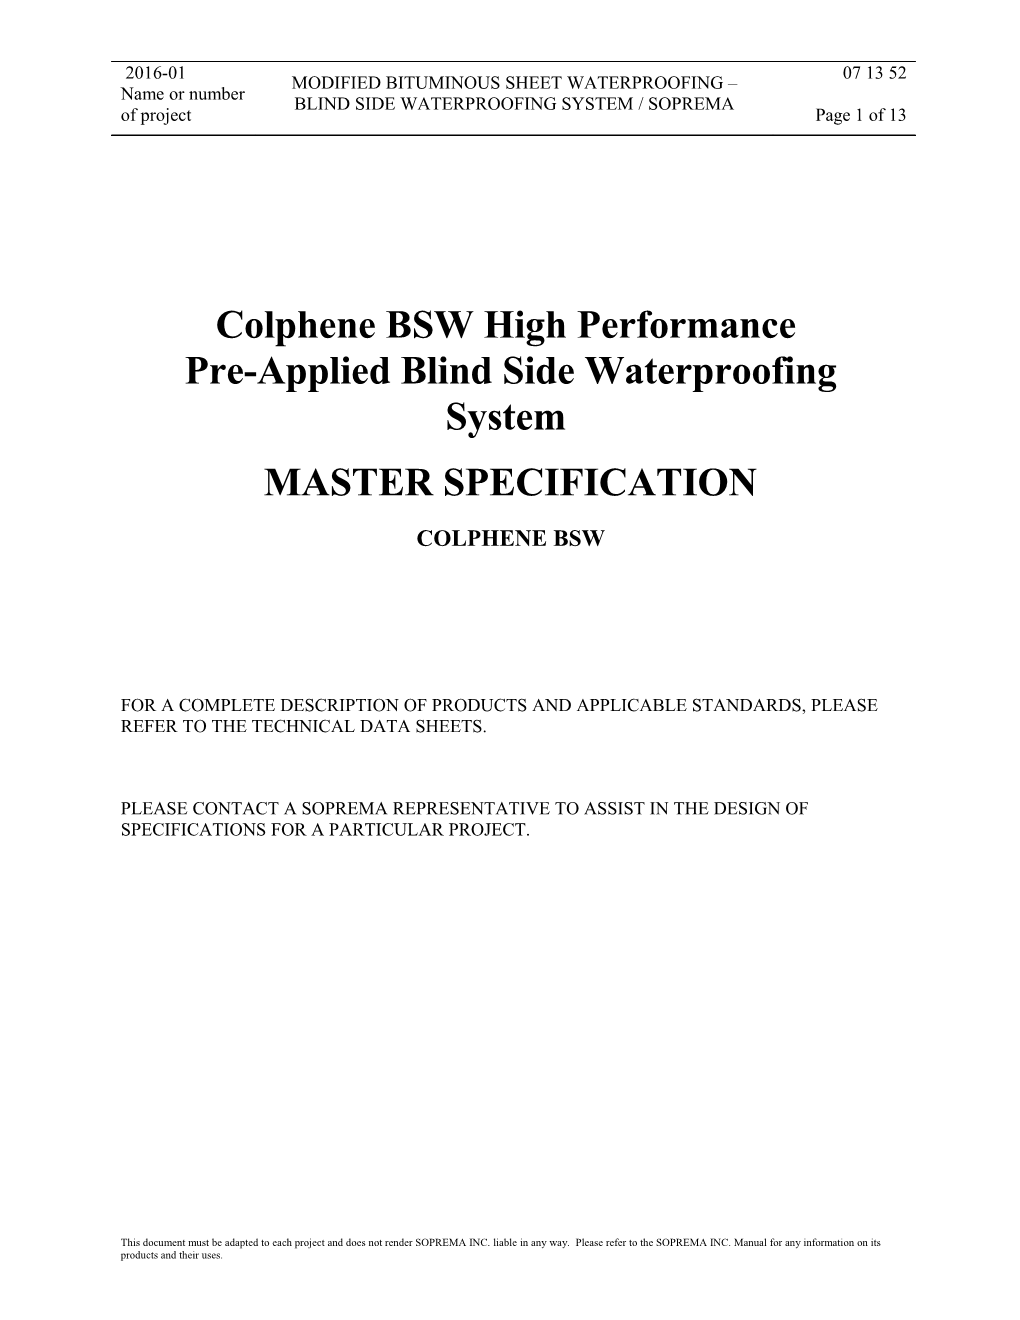 Colphene BSW High Performance Pre-Applied Blind Side Waterproofing System